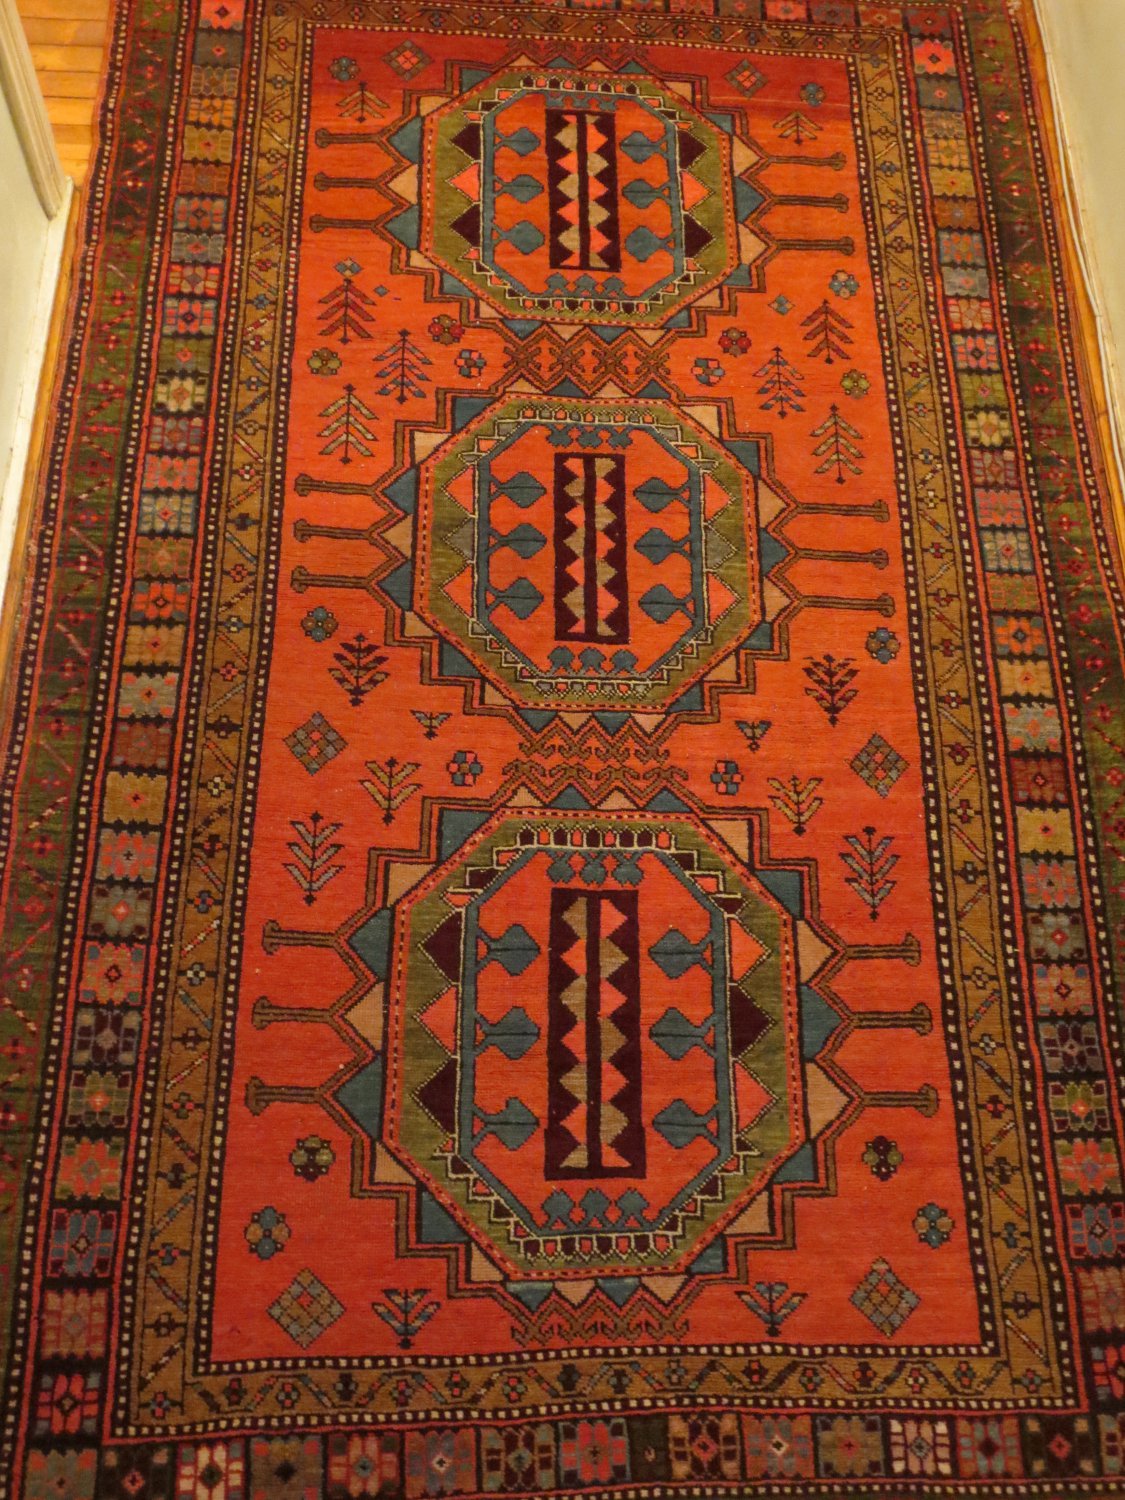 ANTIQUE CAUCASIAN HAND KNOTTED WOOL RUG, Size: 7,3x5,3